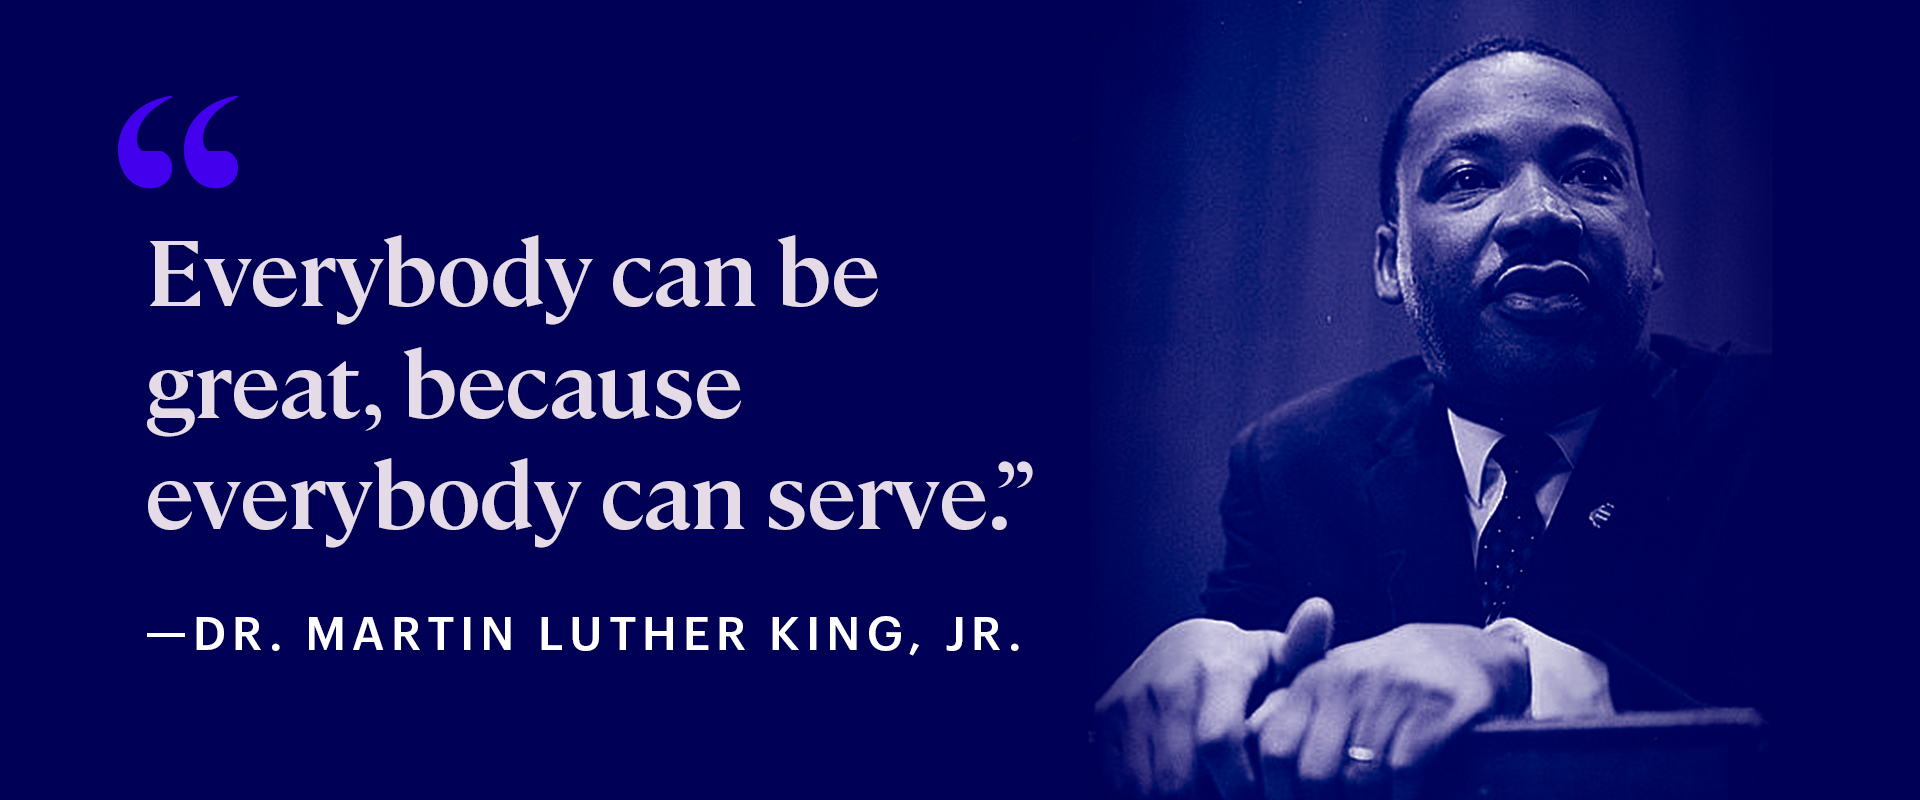 MLK quote graphic